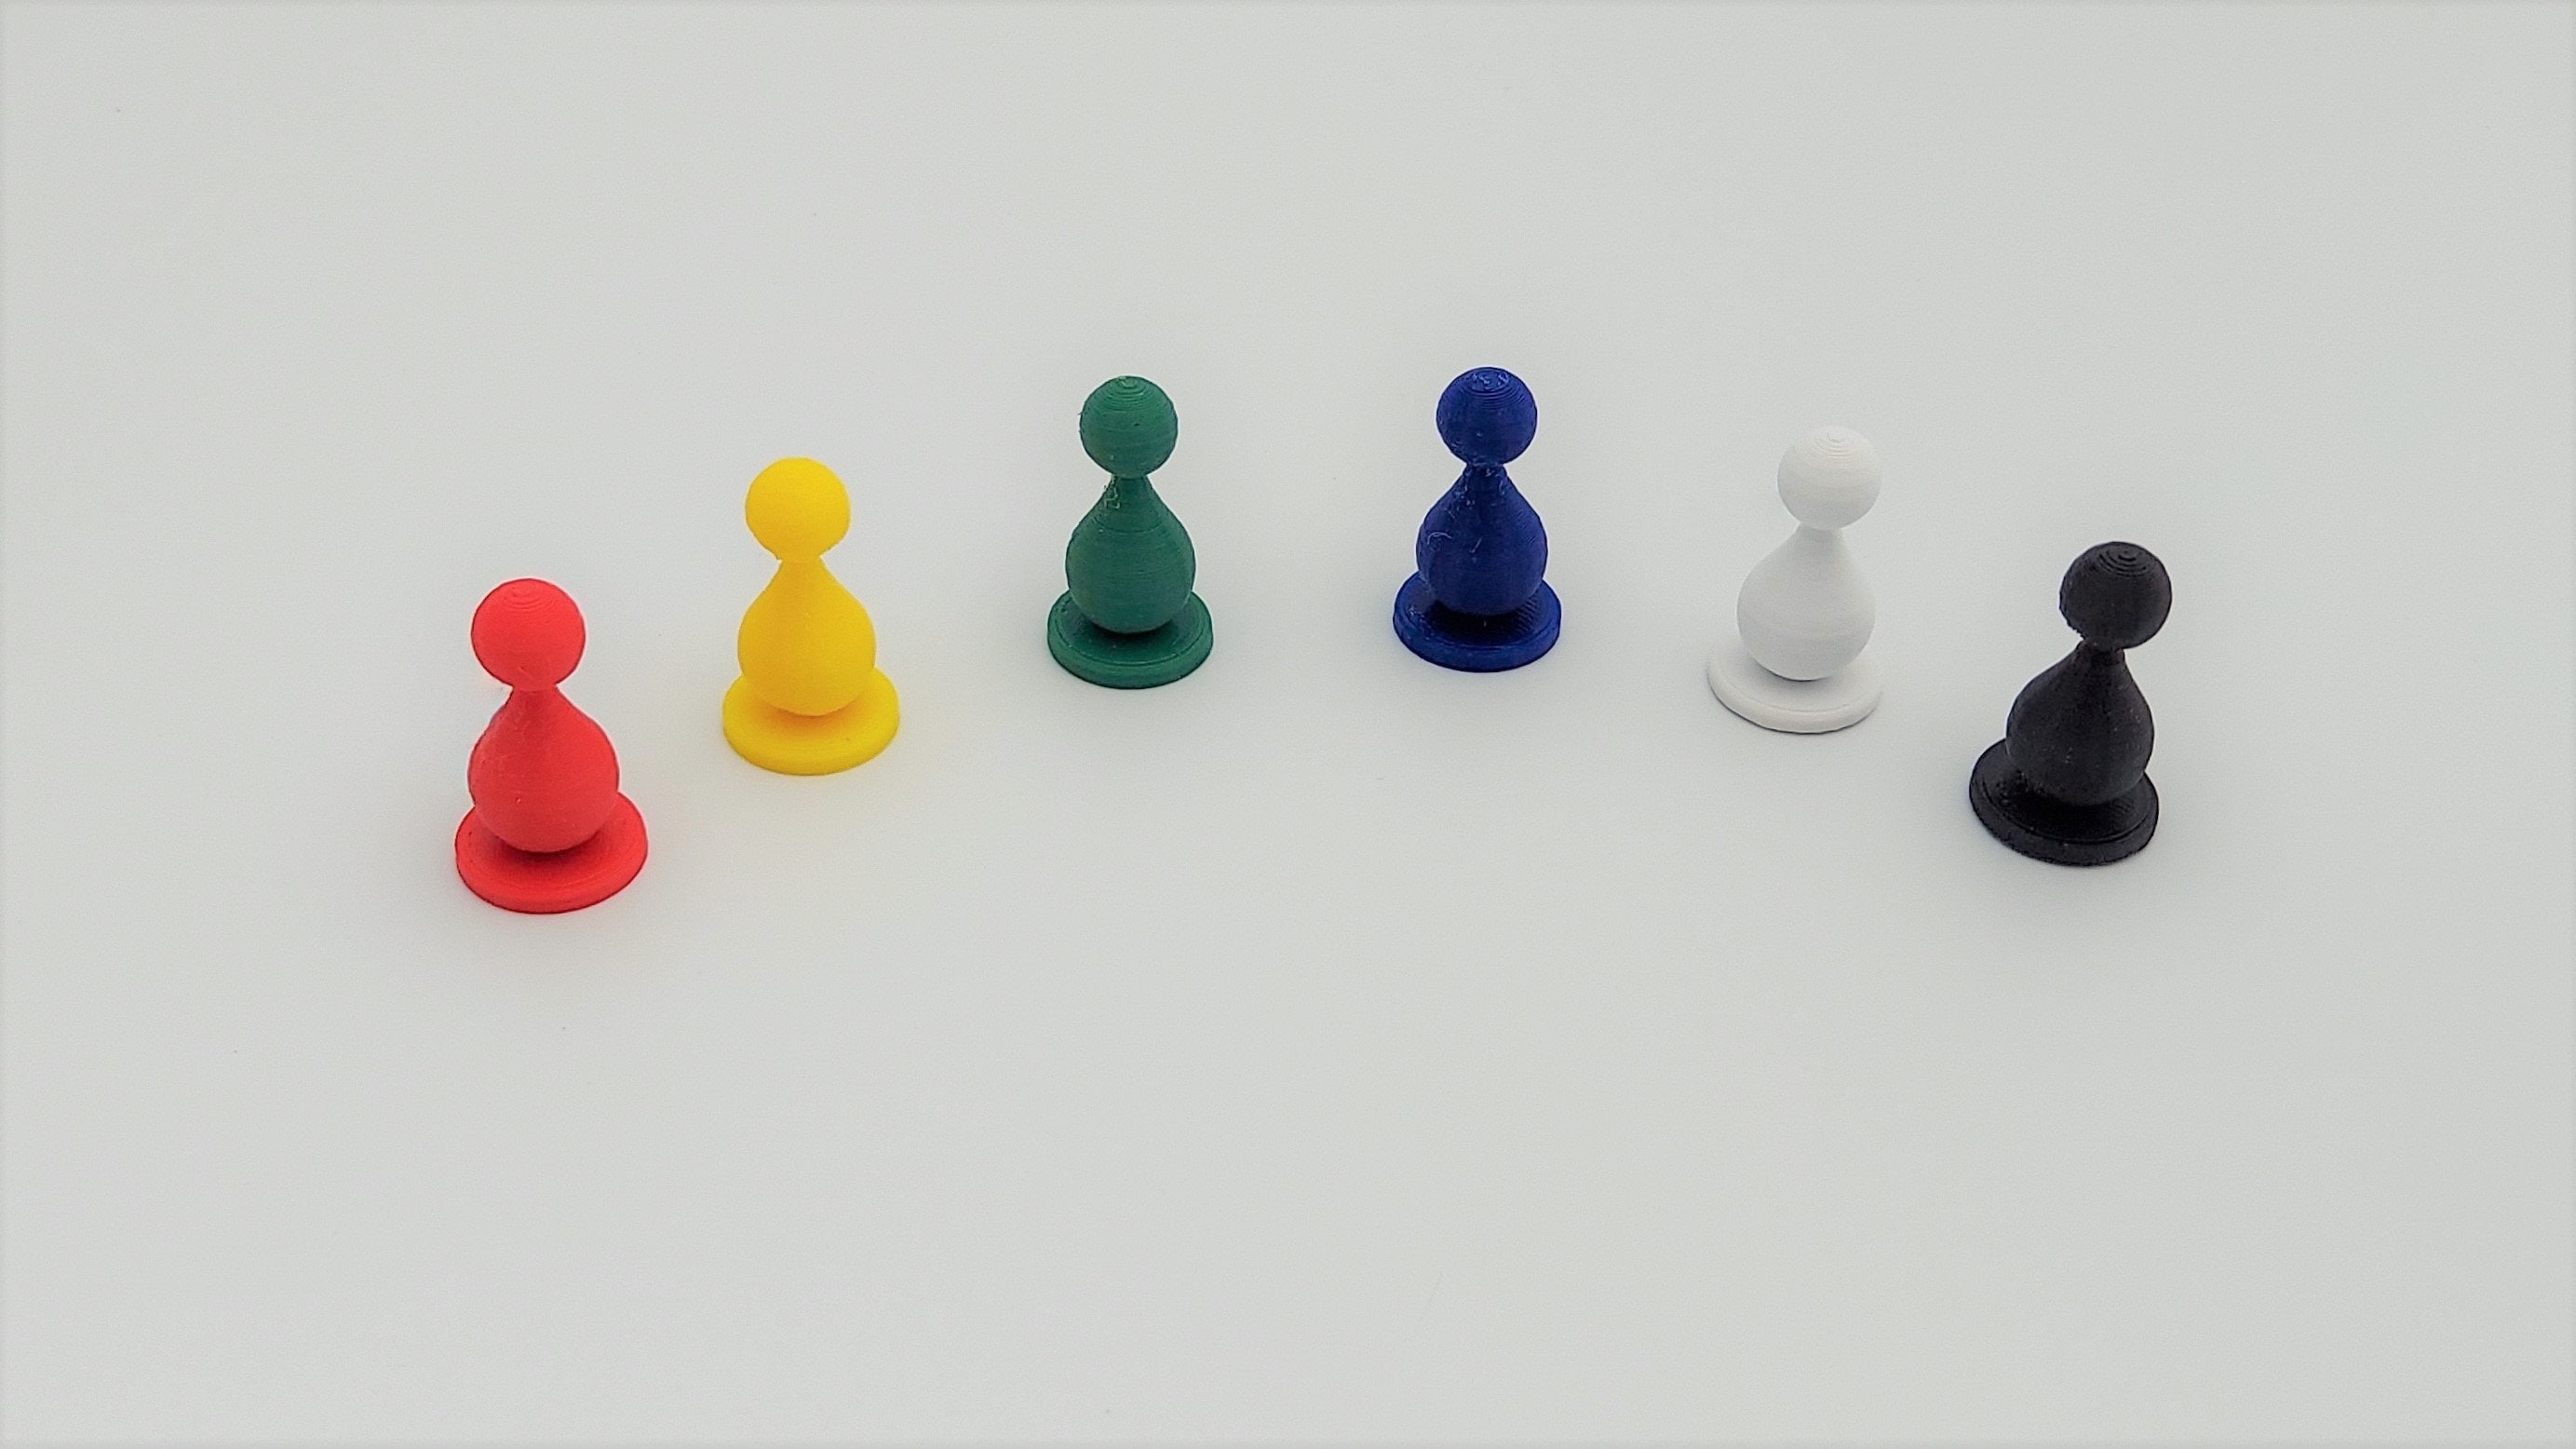 Shappy 32 Pieces Multicolor Plastic Pawn Chess Pieces for Board Games Pawns  Tabletop Markers 1 Inch